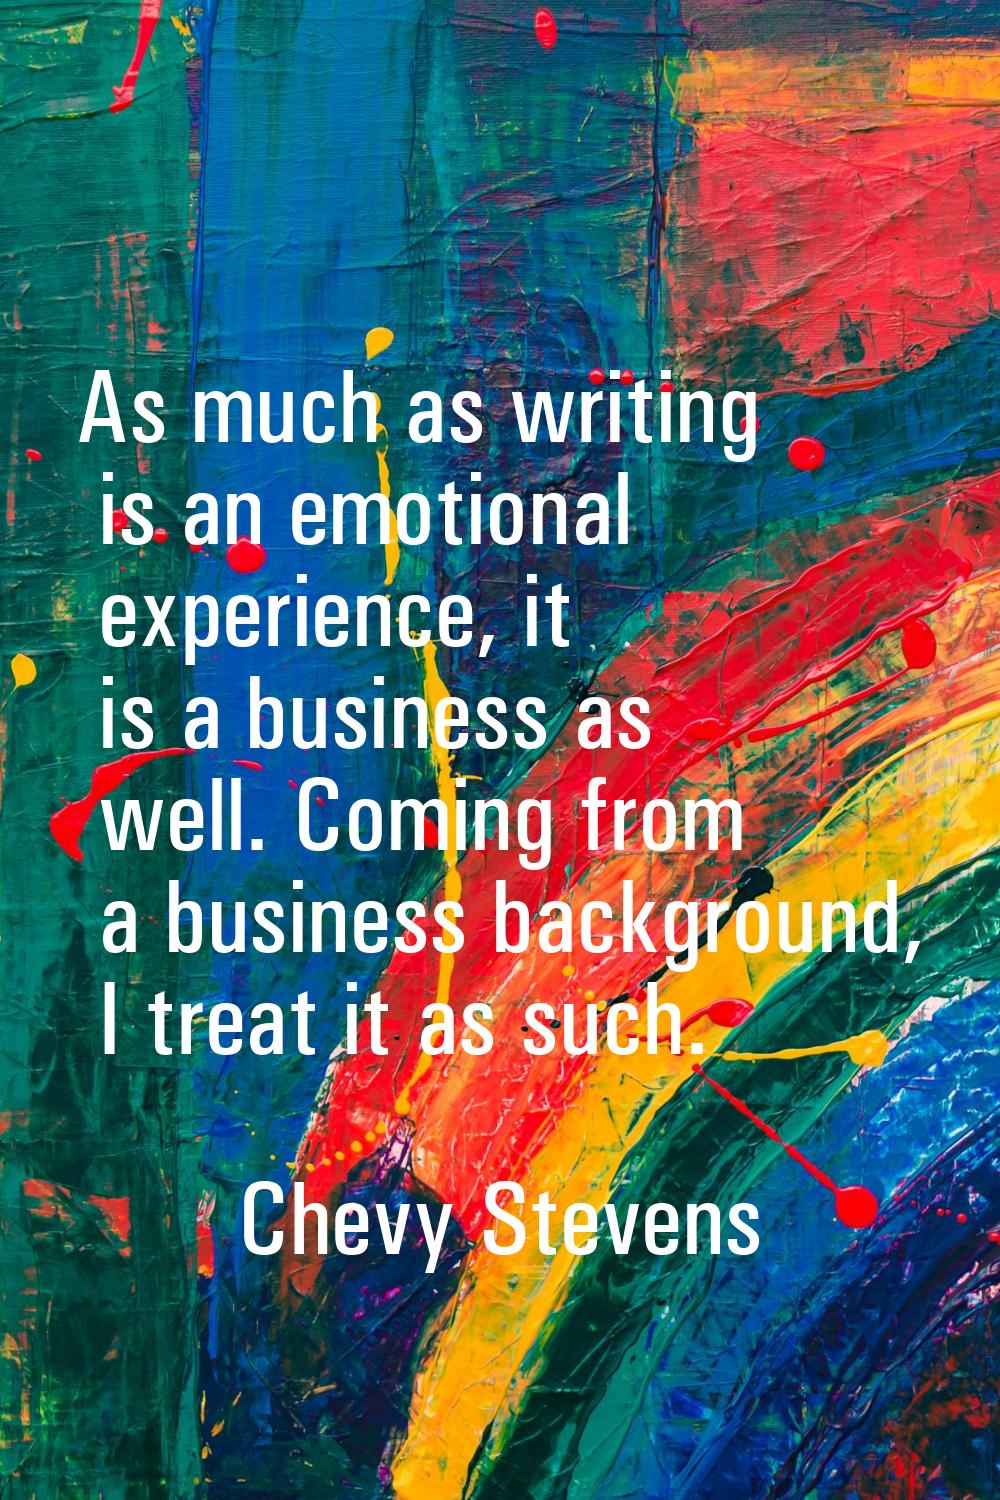 As much as writing is an emotional experience, it is a business as well. Coming from a business bac